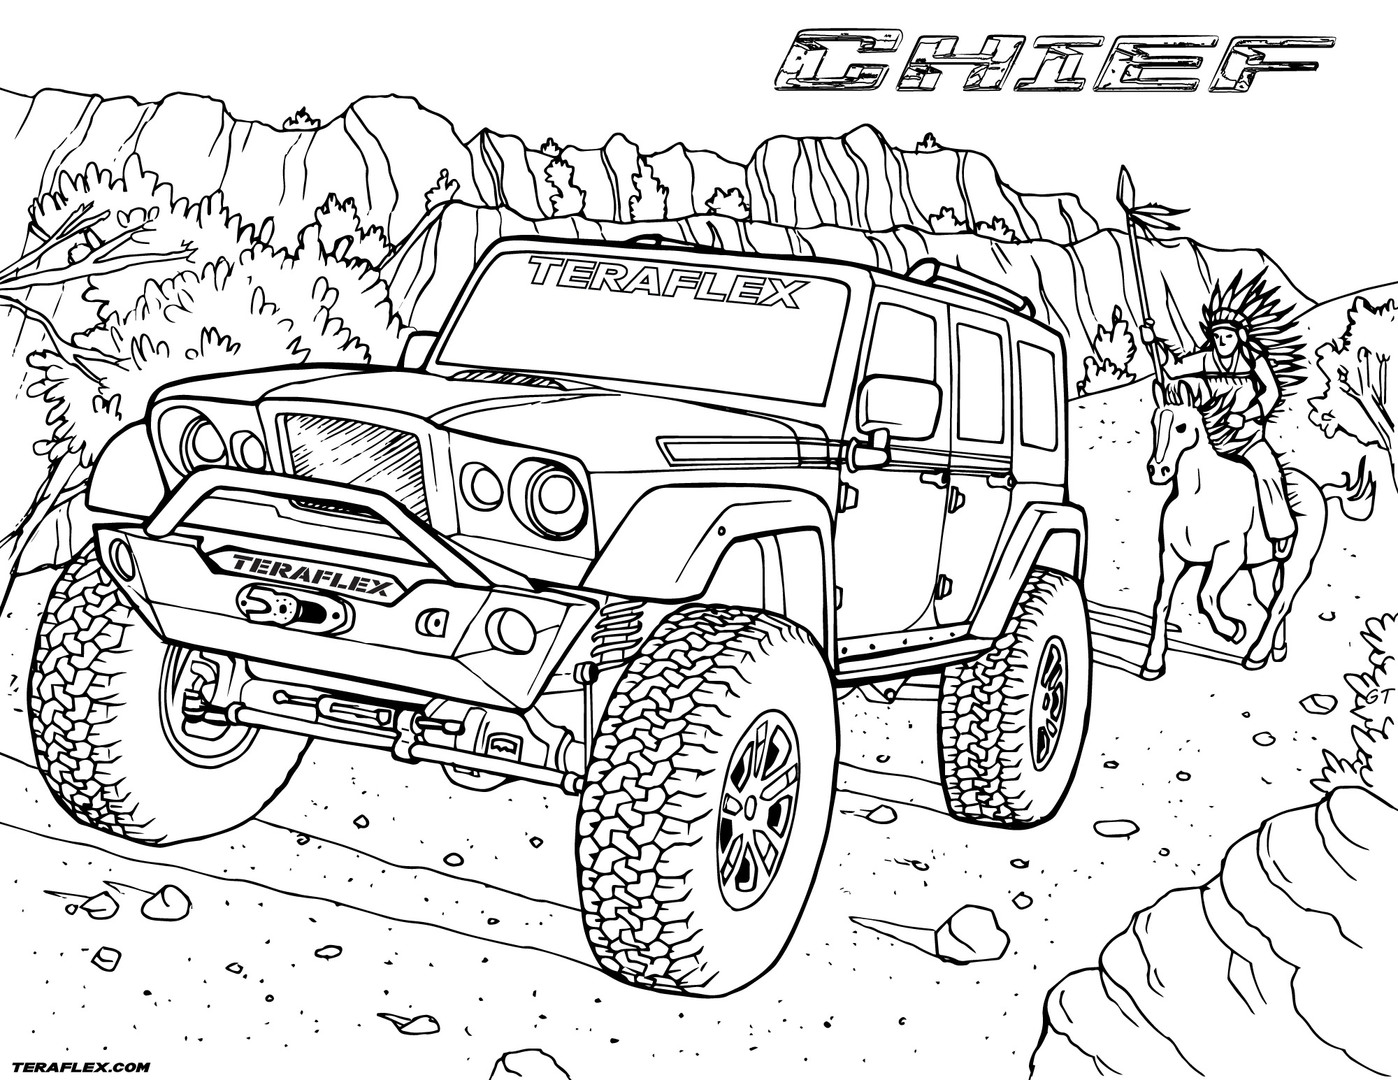 Army Jeep Coloring Pages at GetColorings.com | Free printable colorings